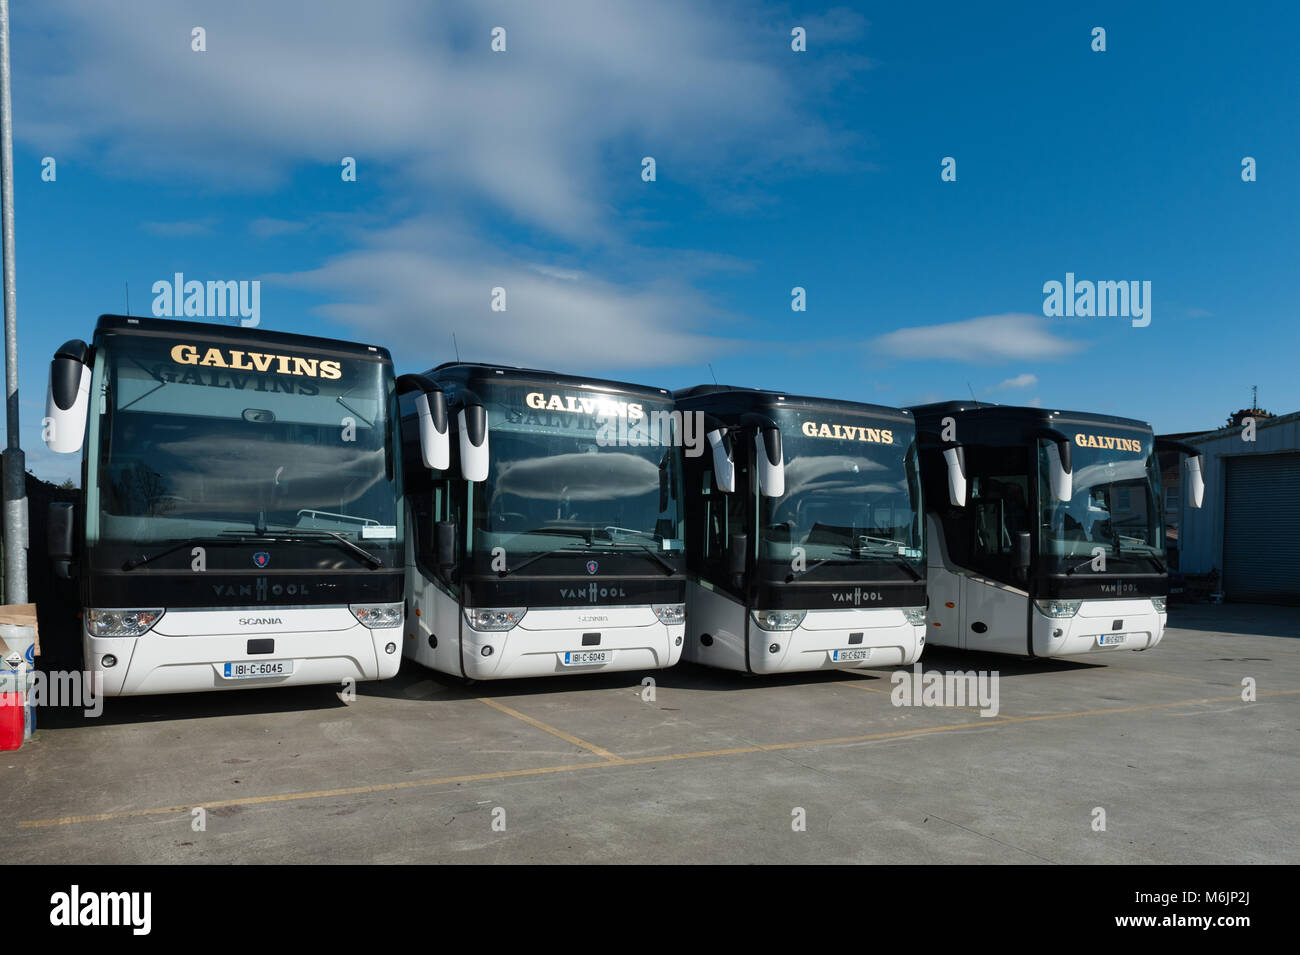 Coaches parked in the yard of Galvins Coach Company, Dunmanway, County Cork, Ireland with copy space. Stock Photo